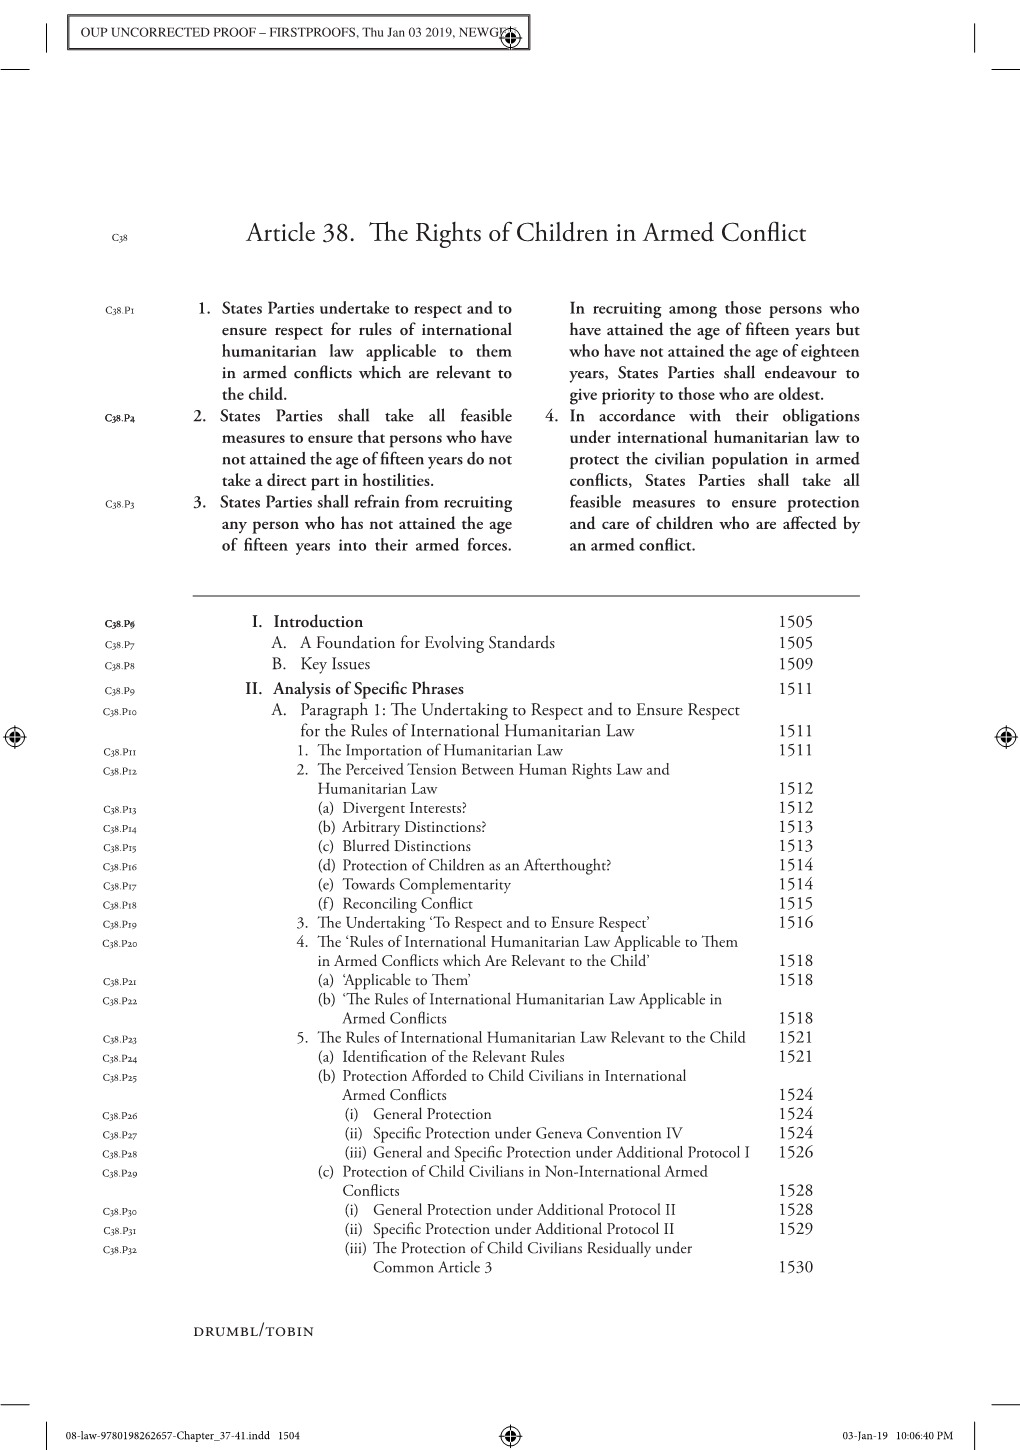 Article 38. the Rights of Children in Armed Conflict